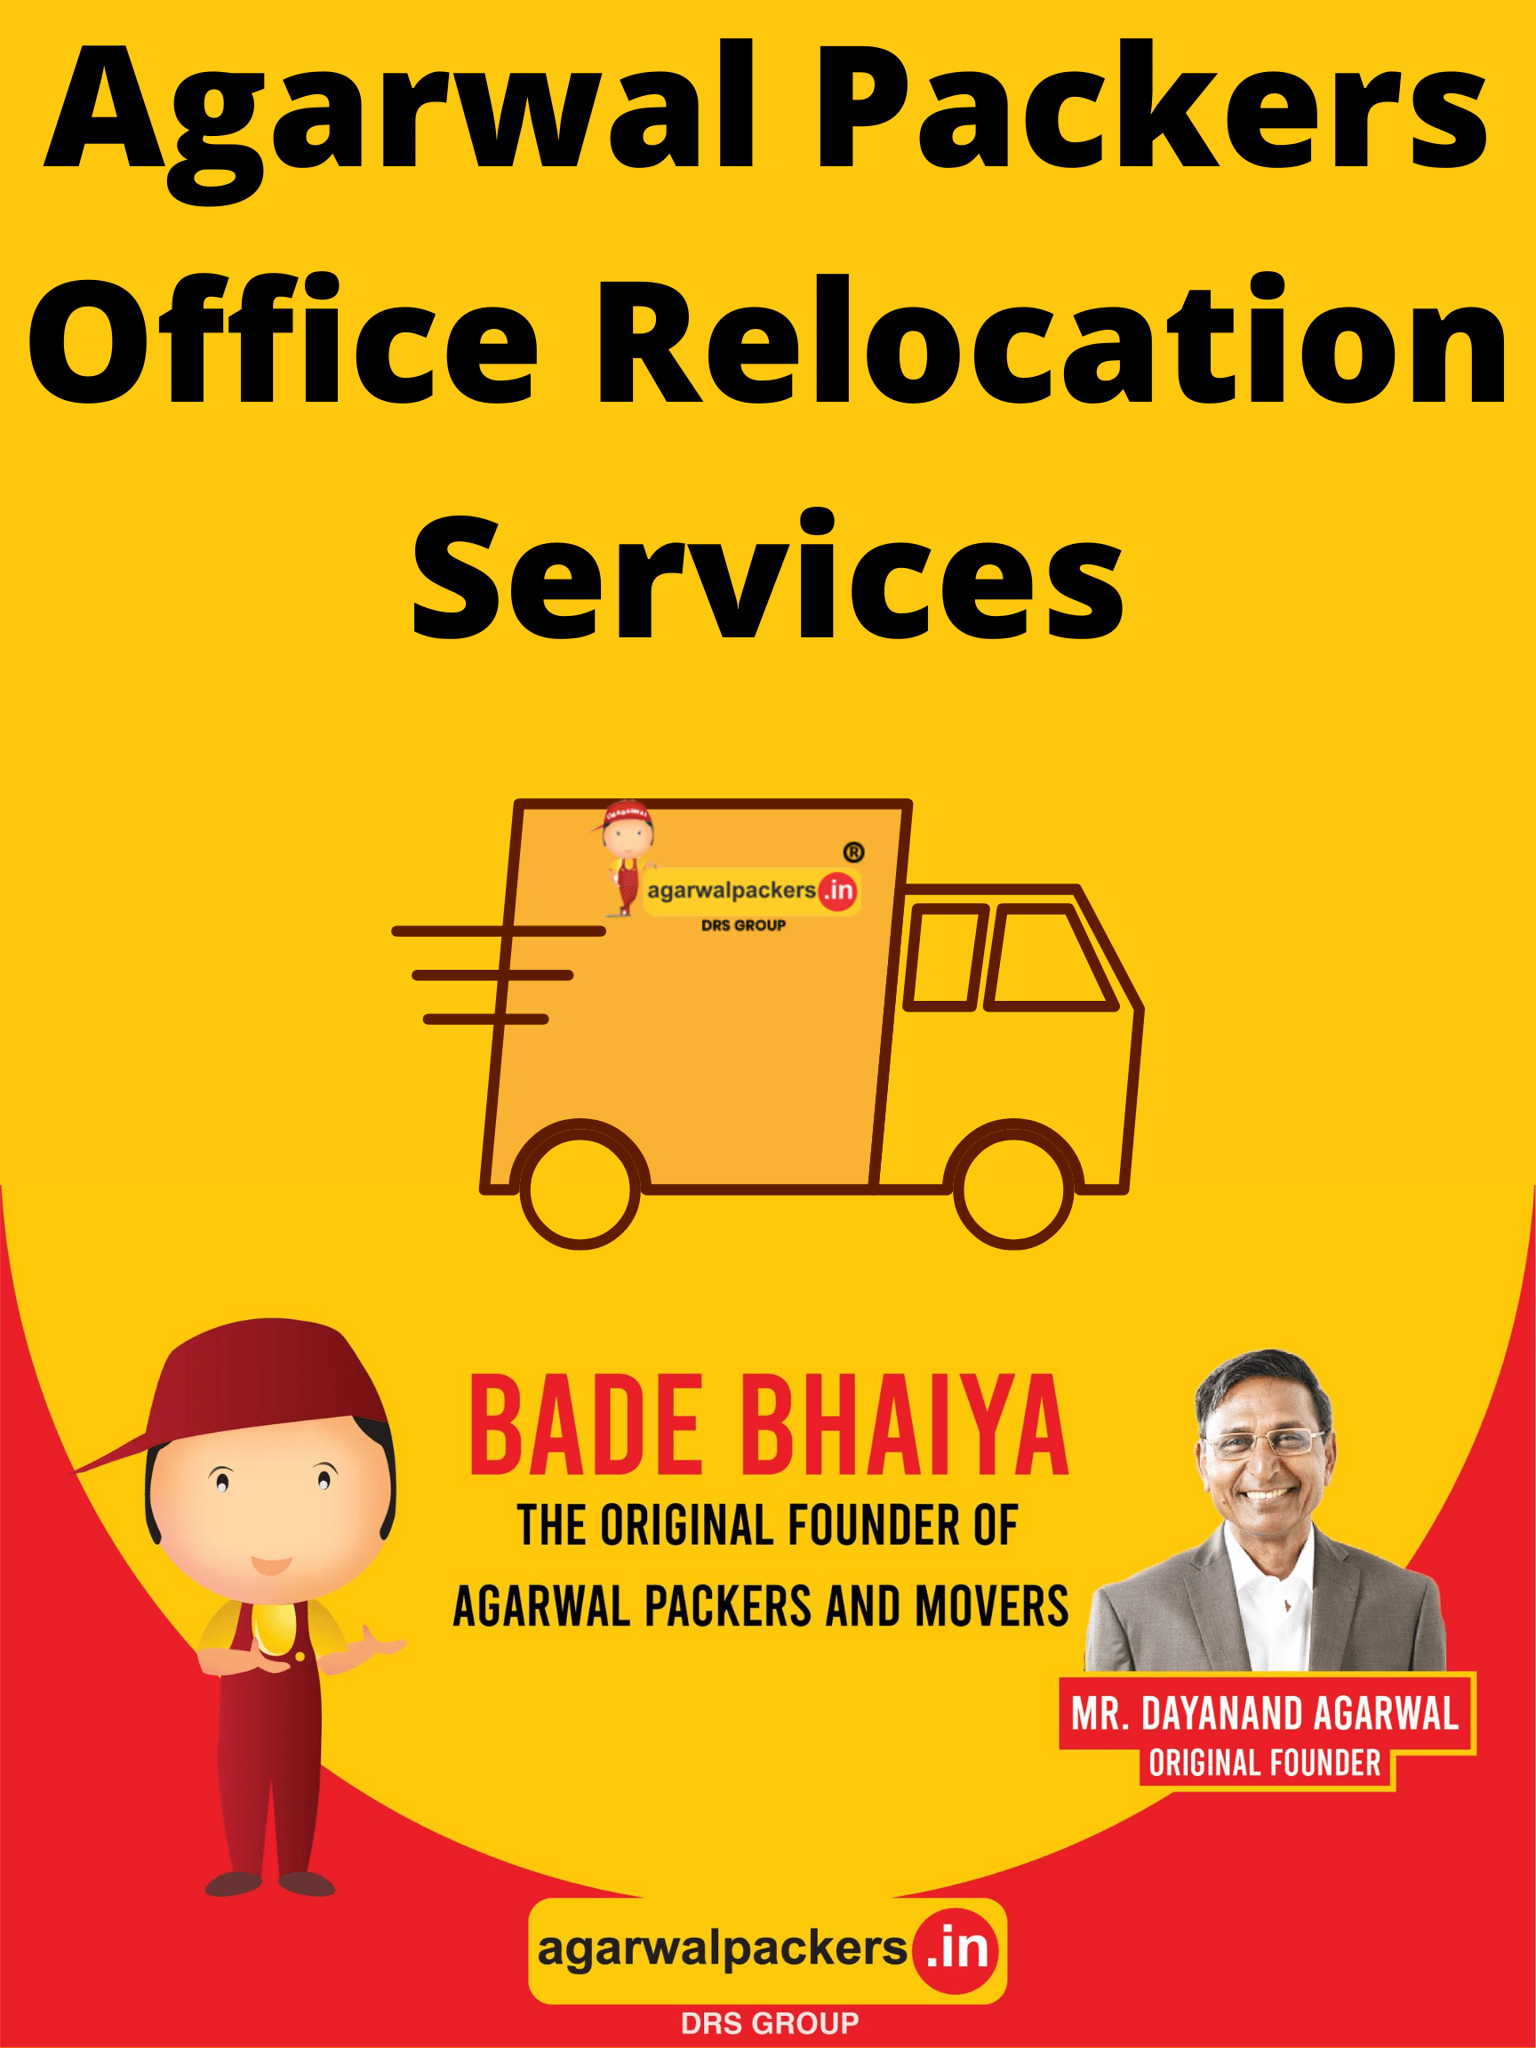 Agarwal Packers Office Relocation Services